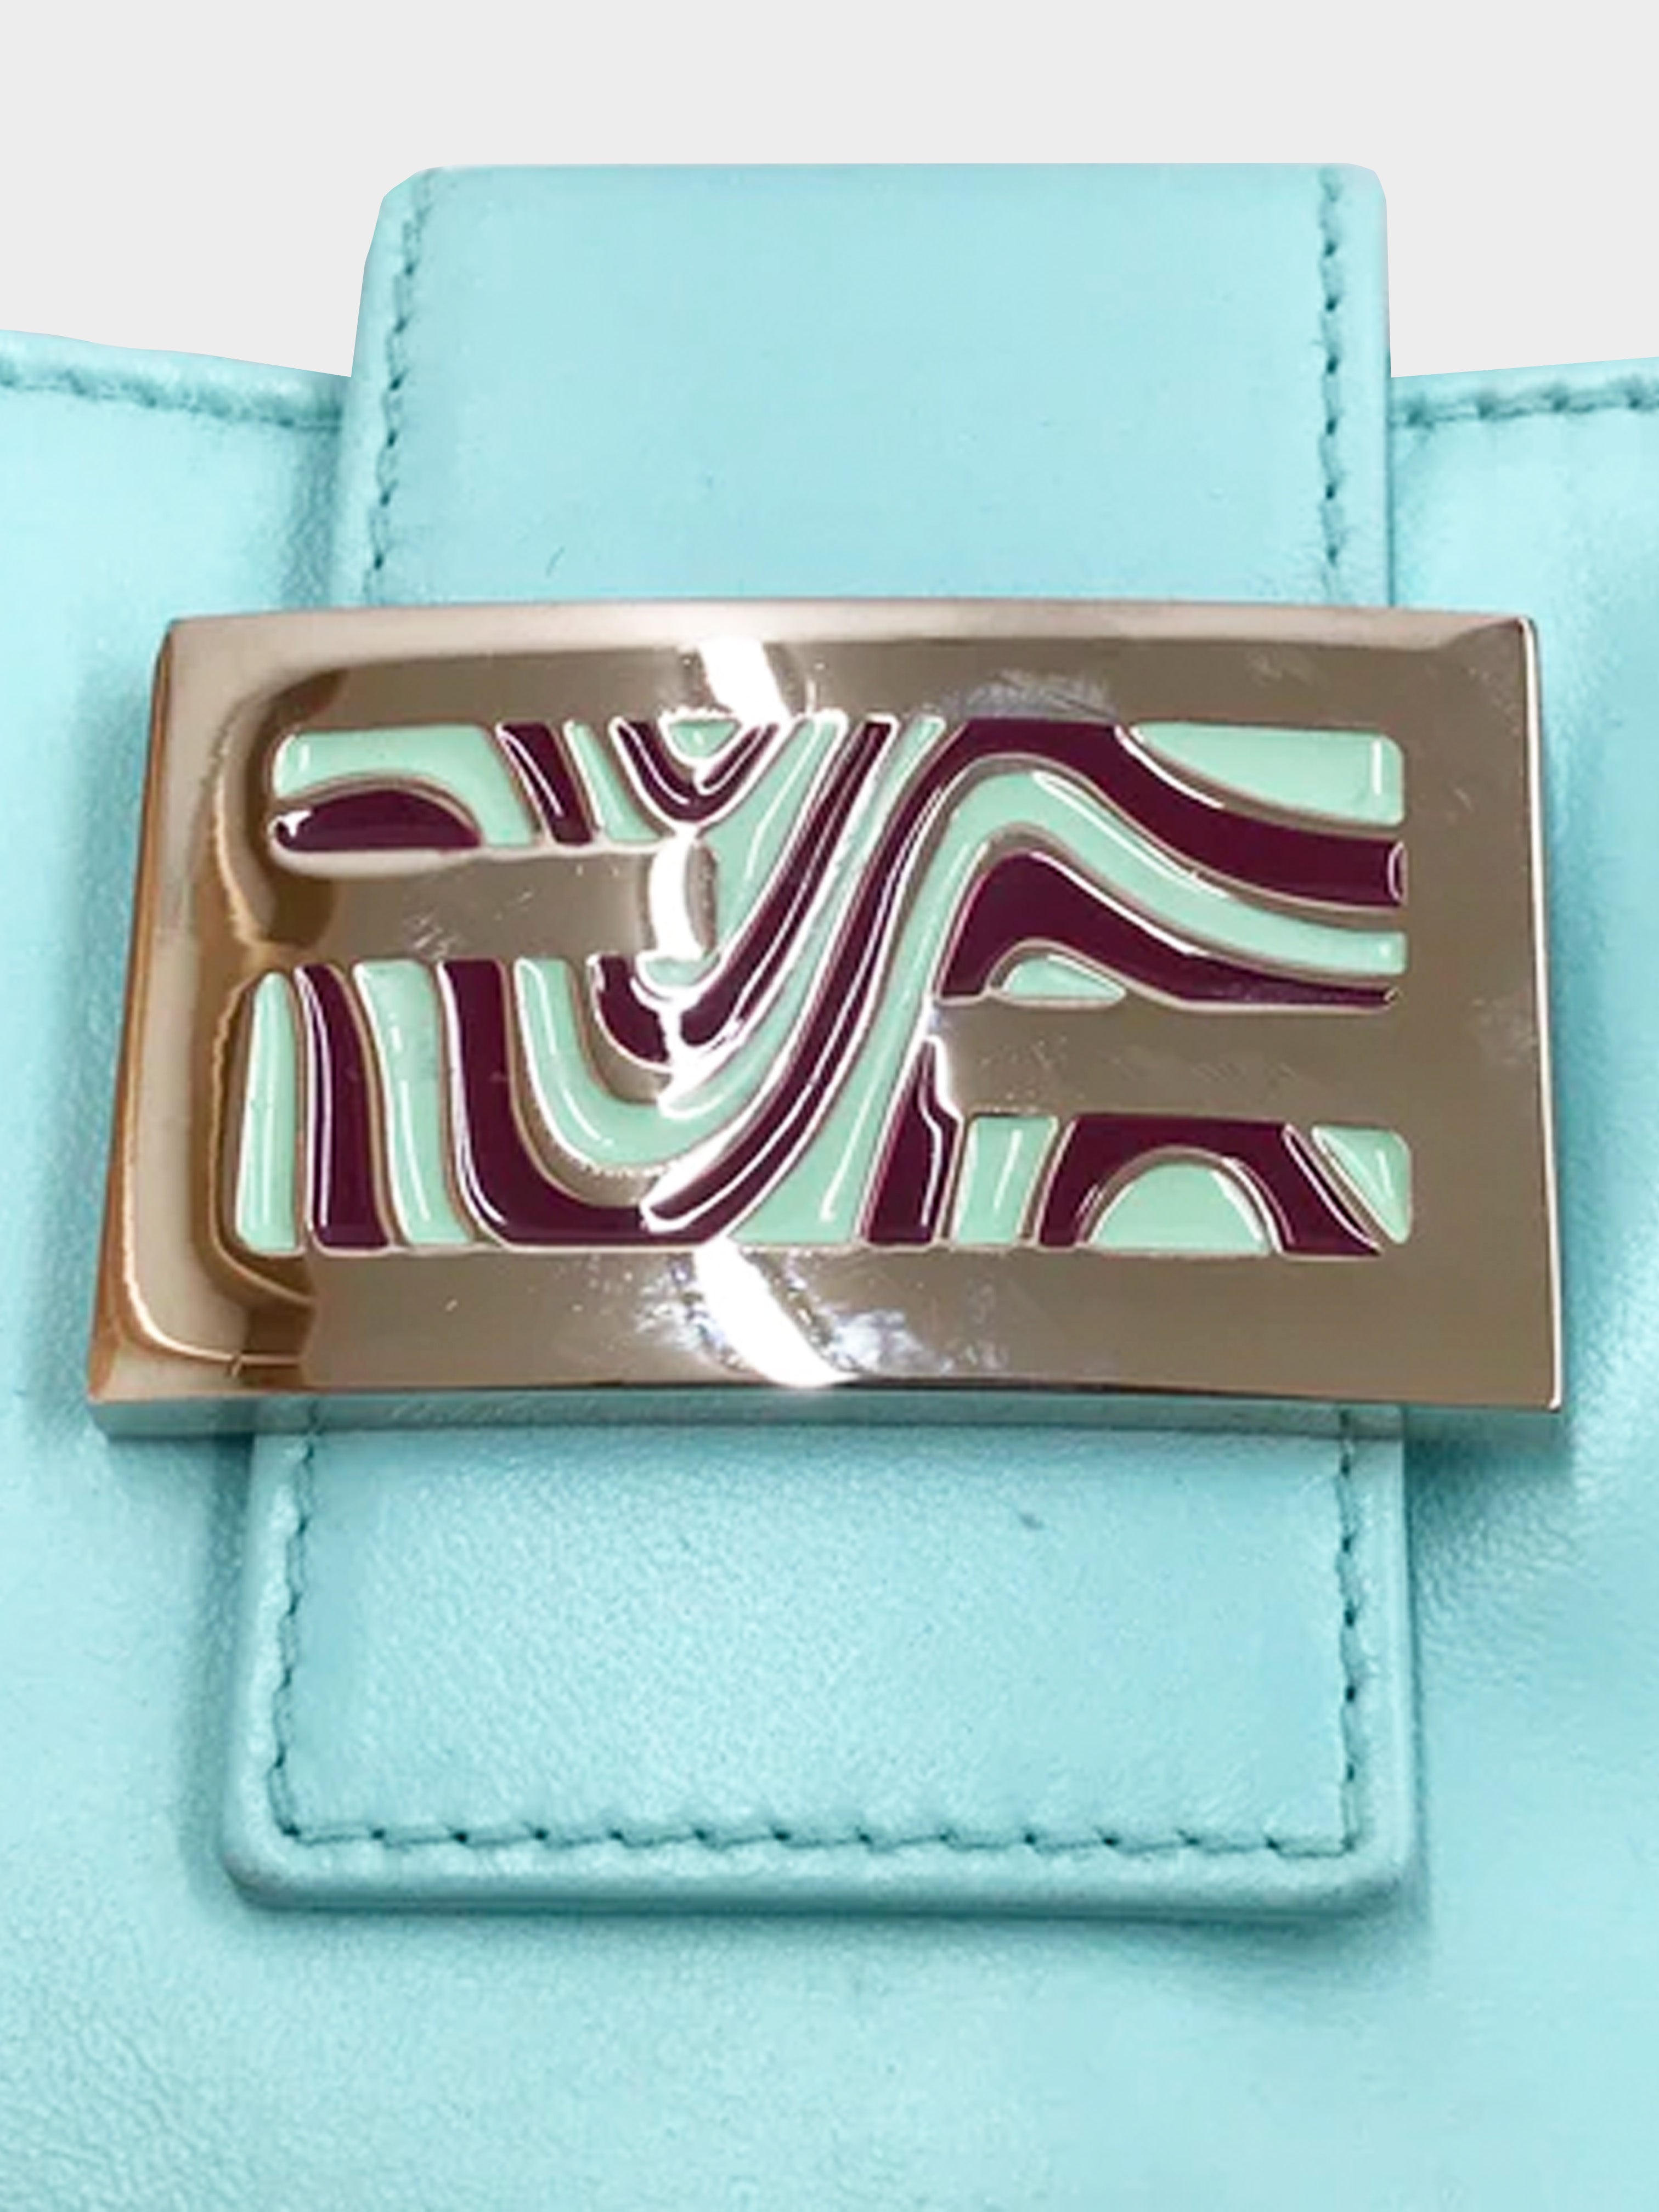 Fendi 2000s Turquoise and Purple Psychedelic Buckle Baguette